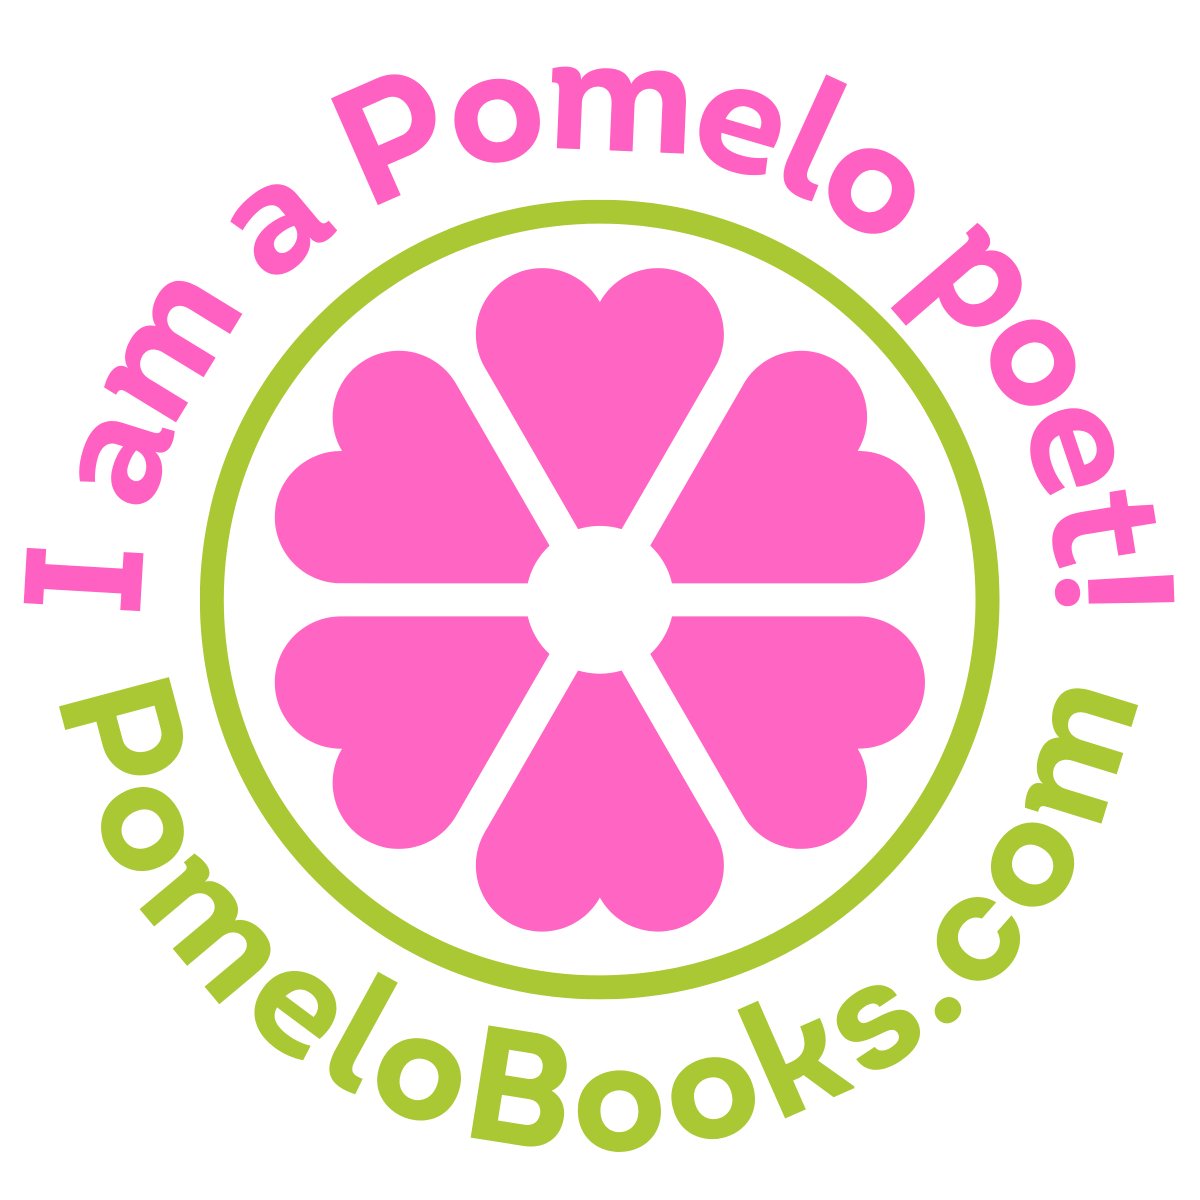 I love this community!! Thanks @SylviaVardell & @janetwongauthor for the fun #logo!

#pomelobooks #poetryforall